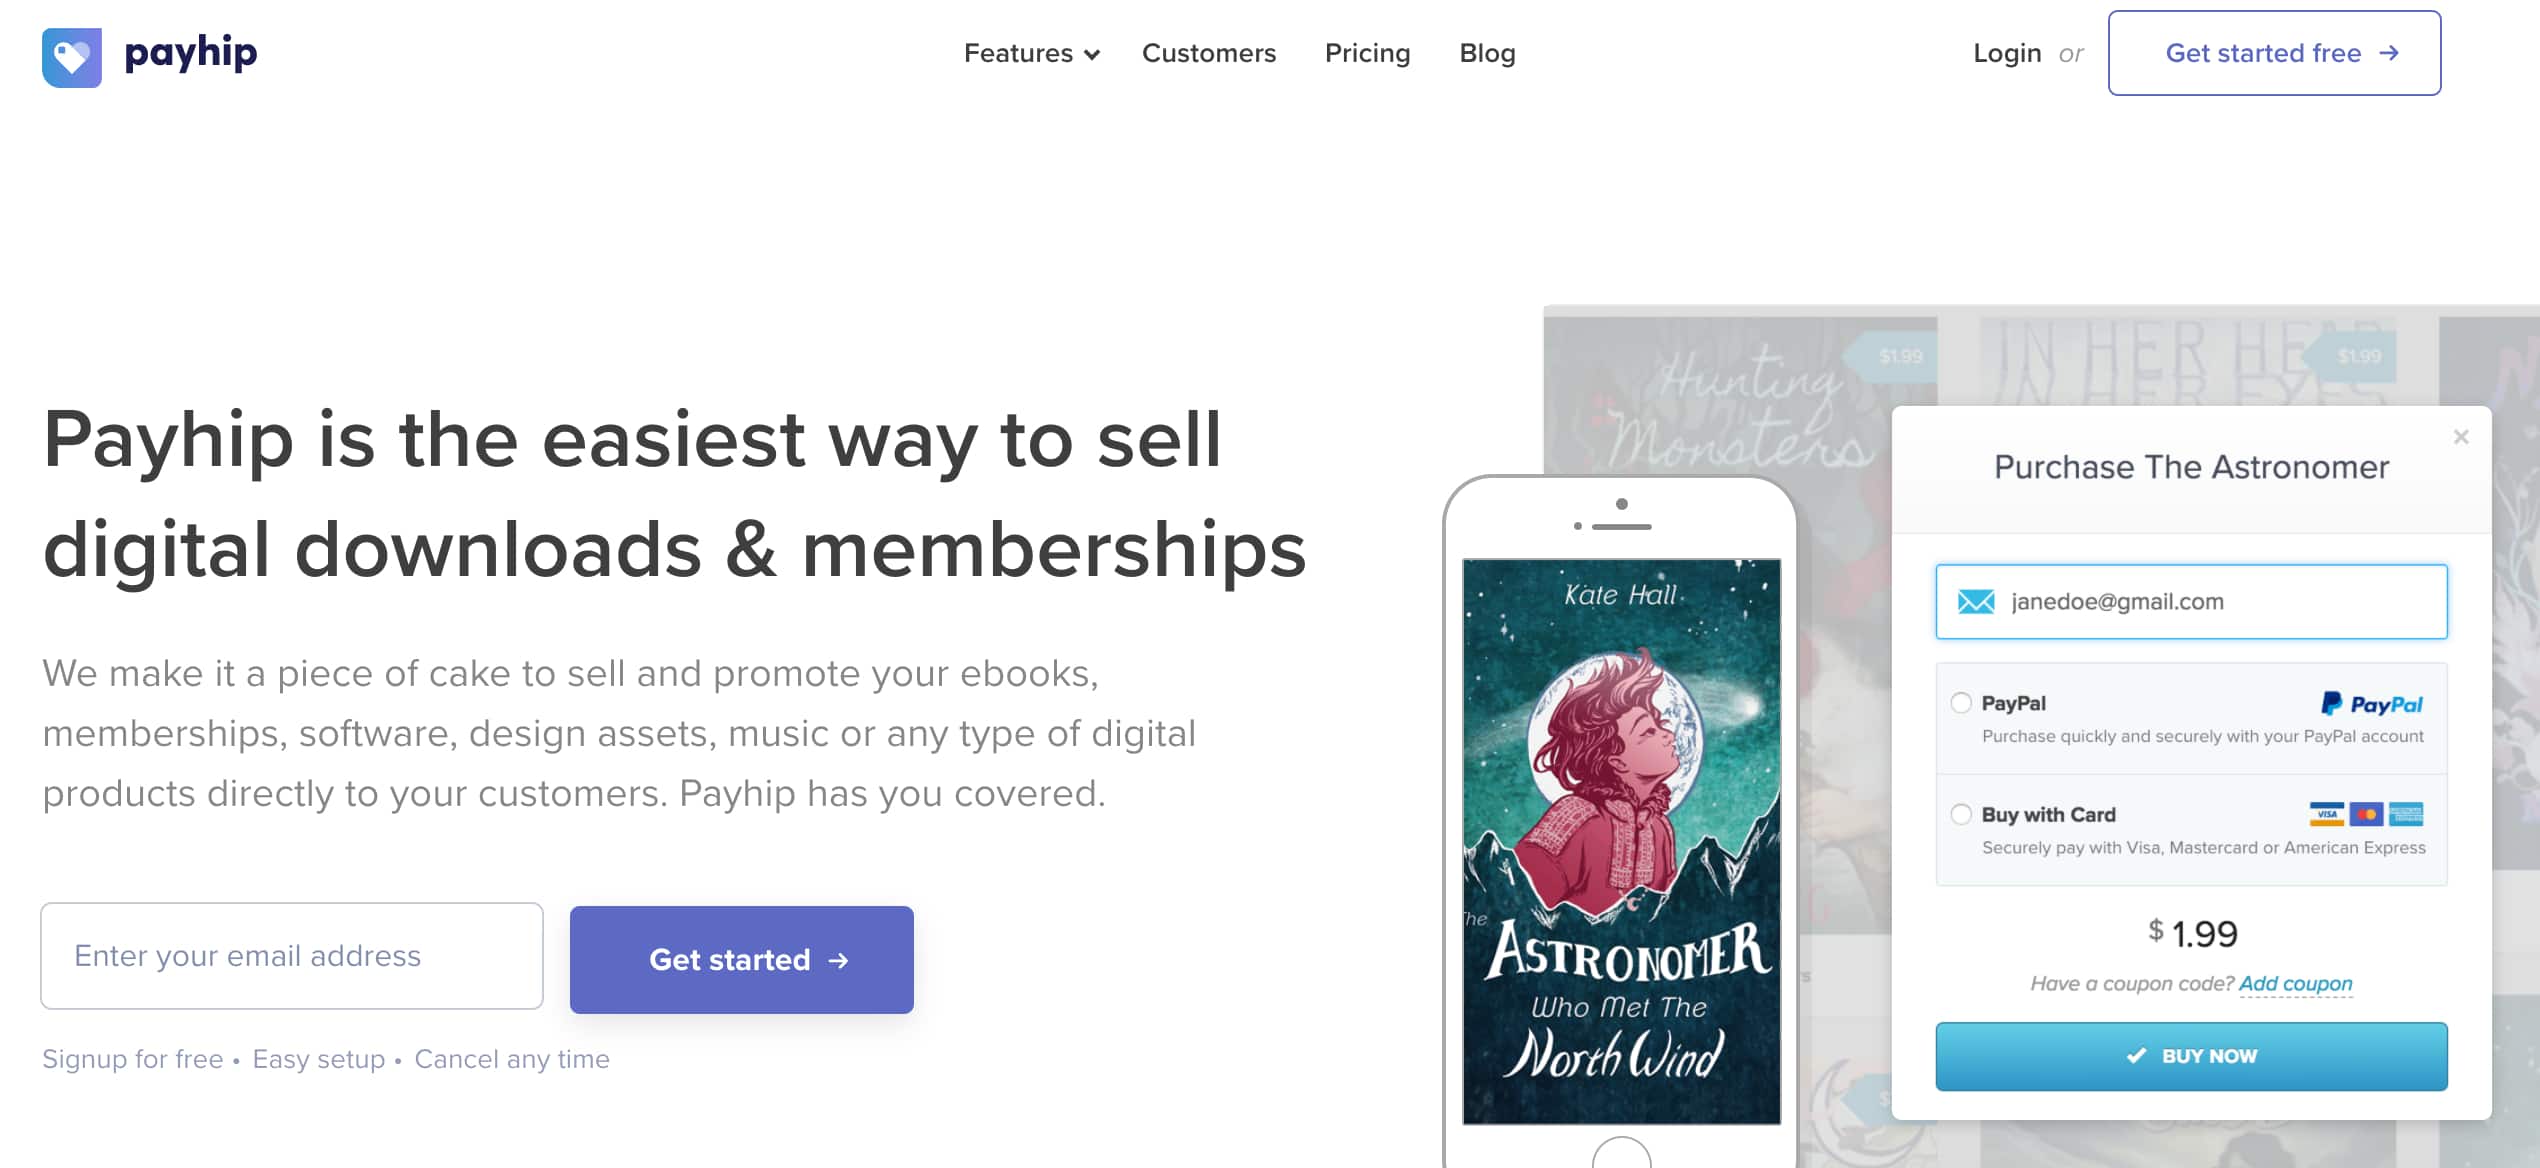 How to Sell Digital Products Online 2020? - A Complete Guide